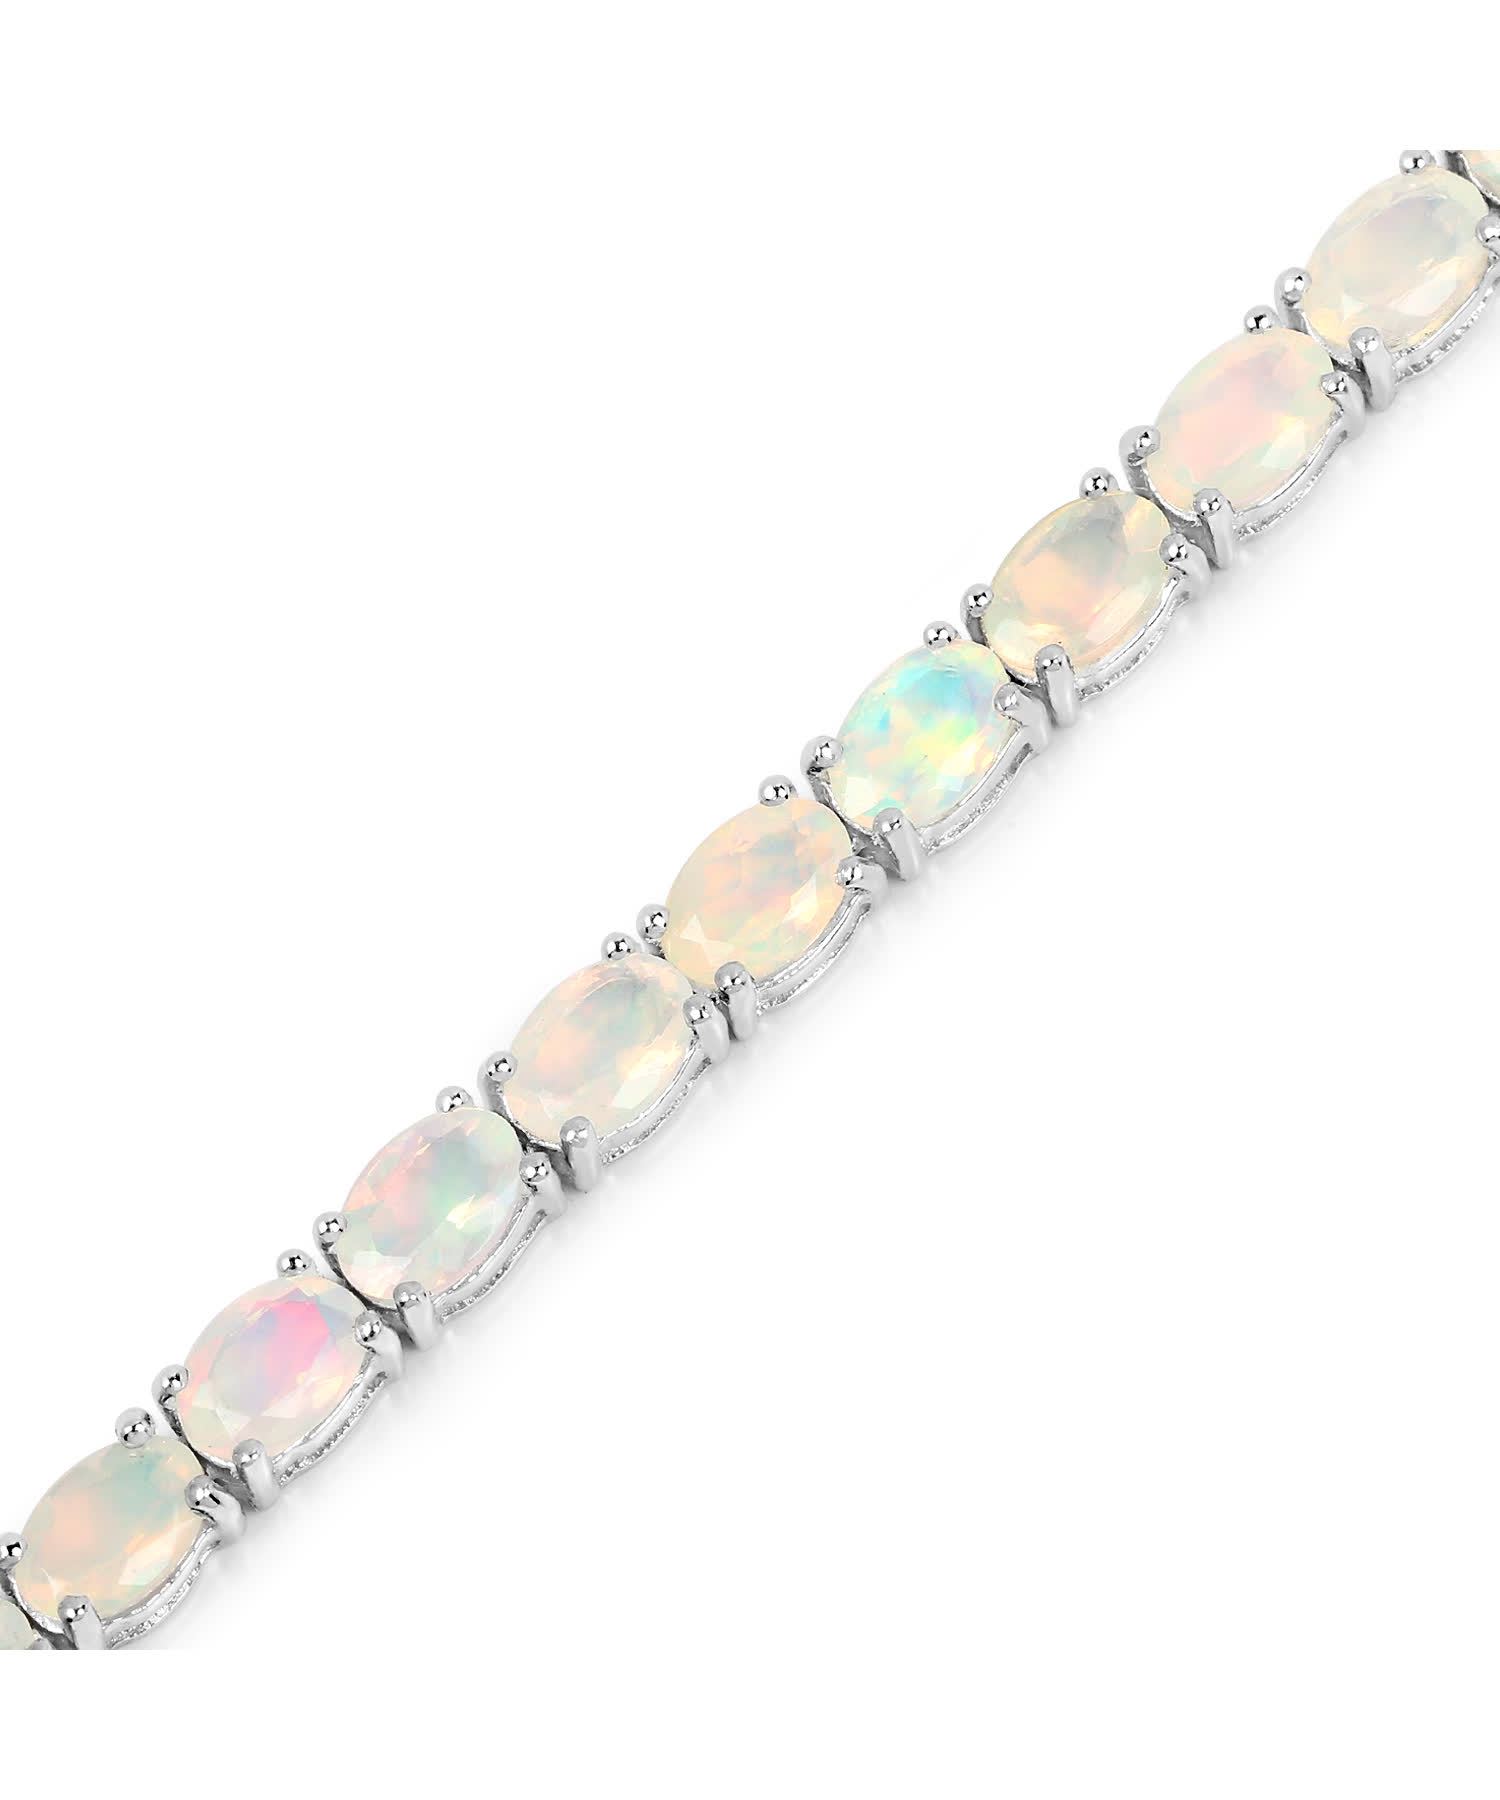 6.48ctw Natural Ethiopian Opal Rhodium Plated 925 Sterling Silver Tennis Bracelet View 3